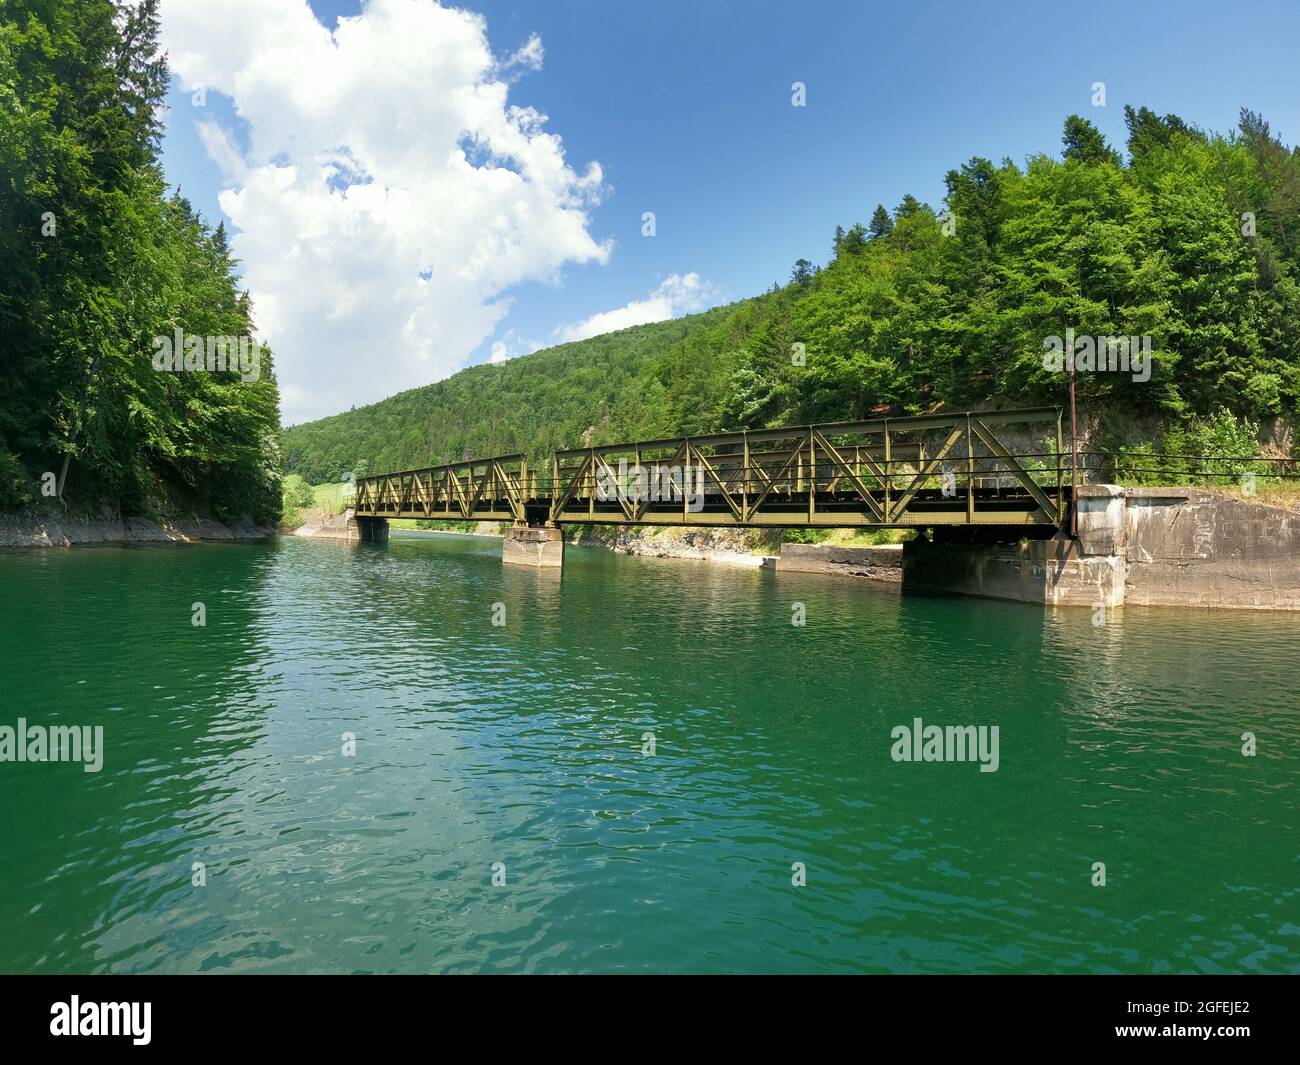 A view of the Palcmanska masa water reservoir in the village of Dedinky Stock Photo